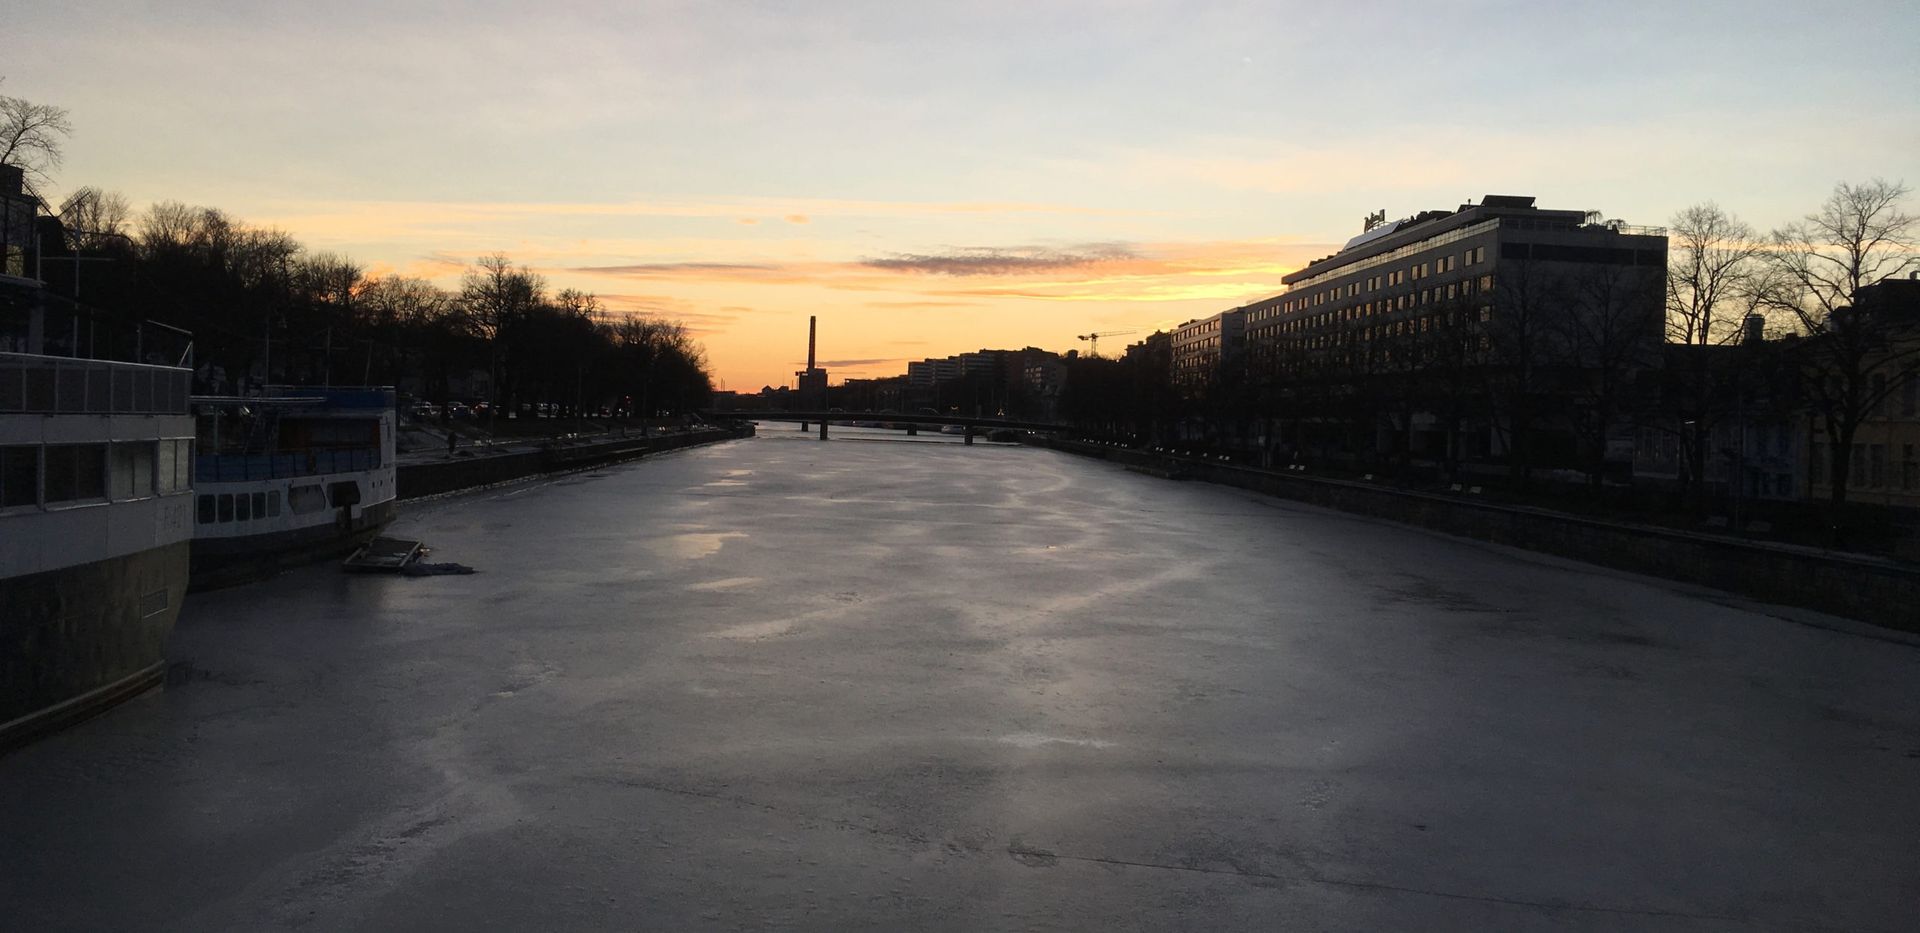 Sunset over the frozen river in Turku.